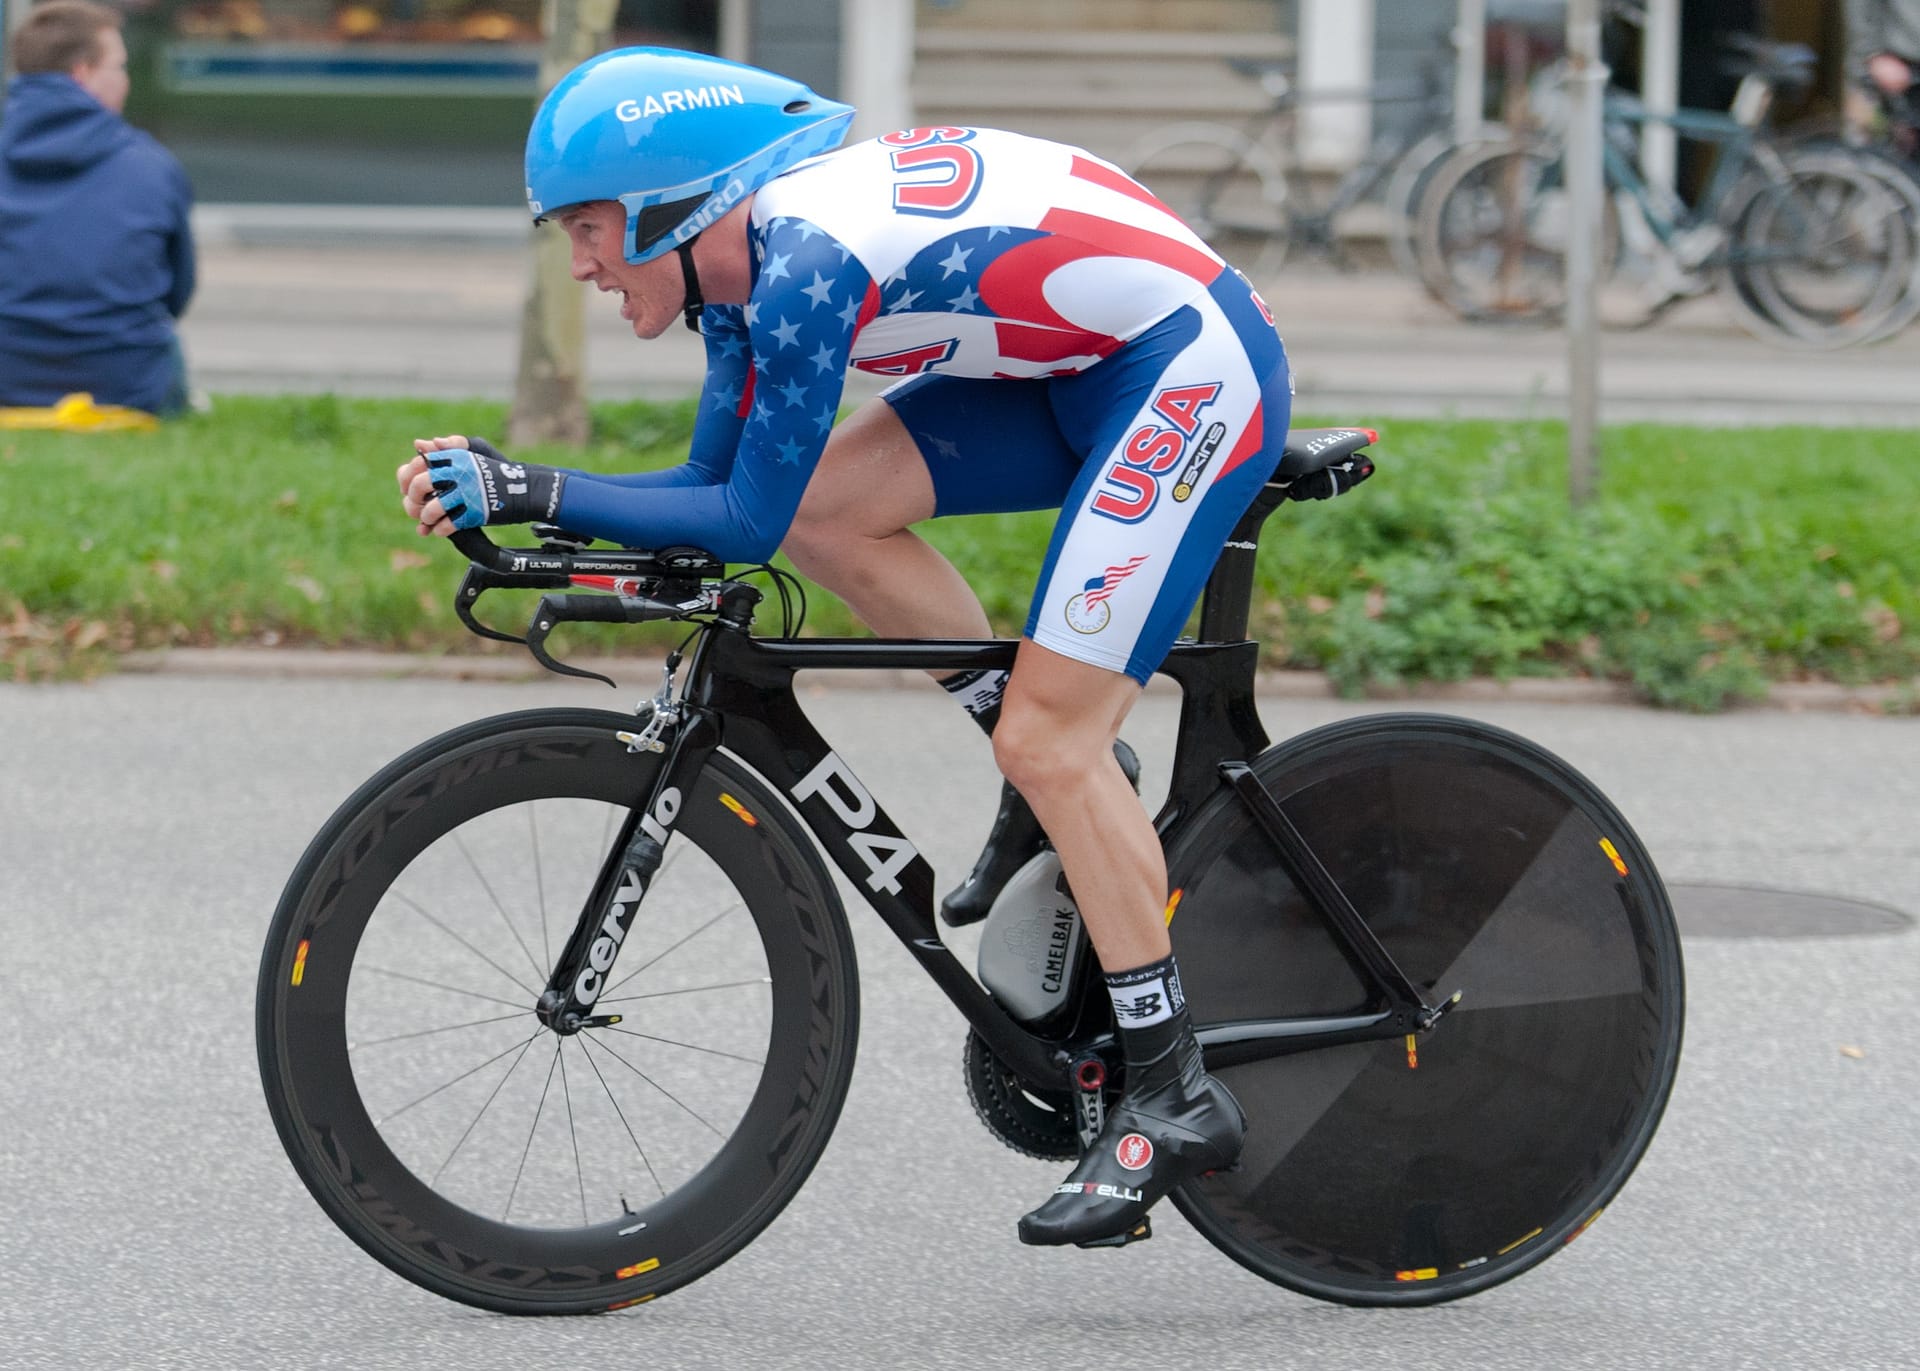 andrew talansky riding a bike after using cbd oil for athletes